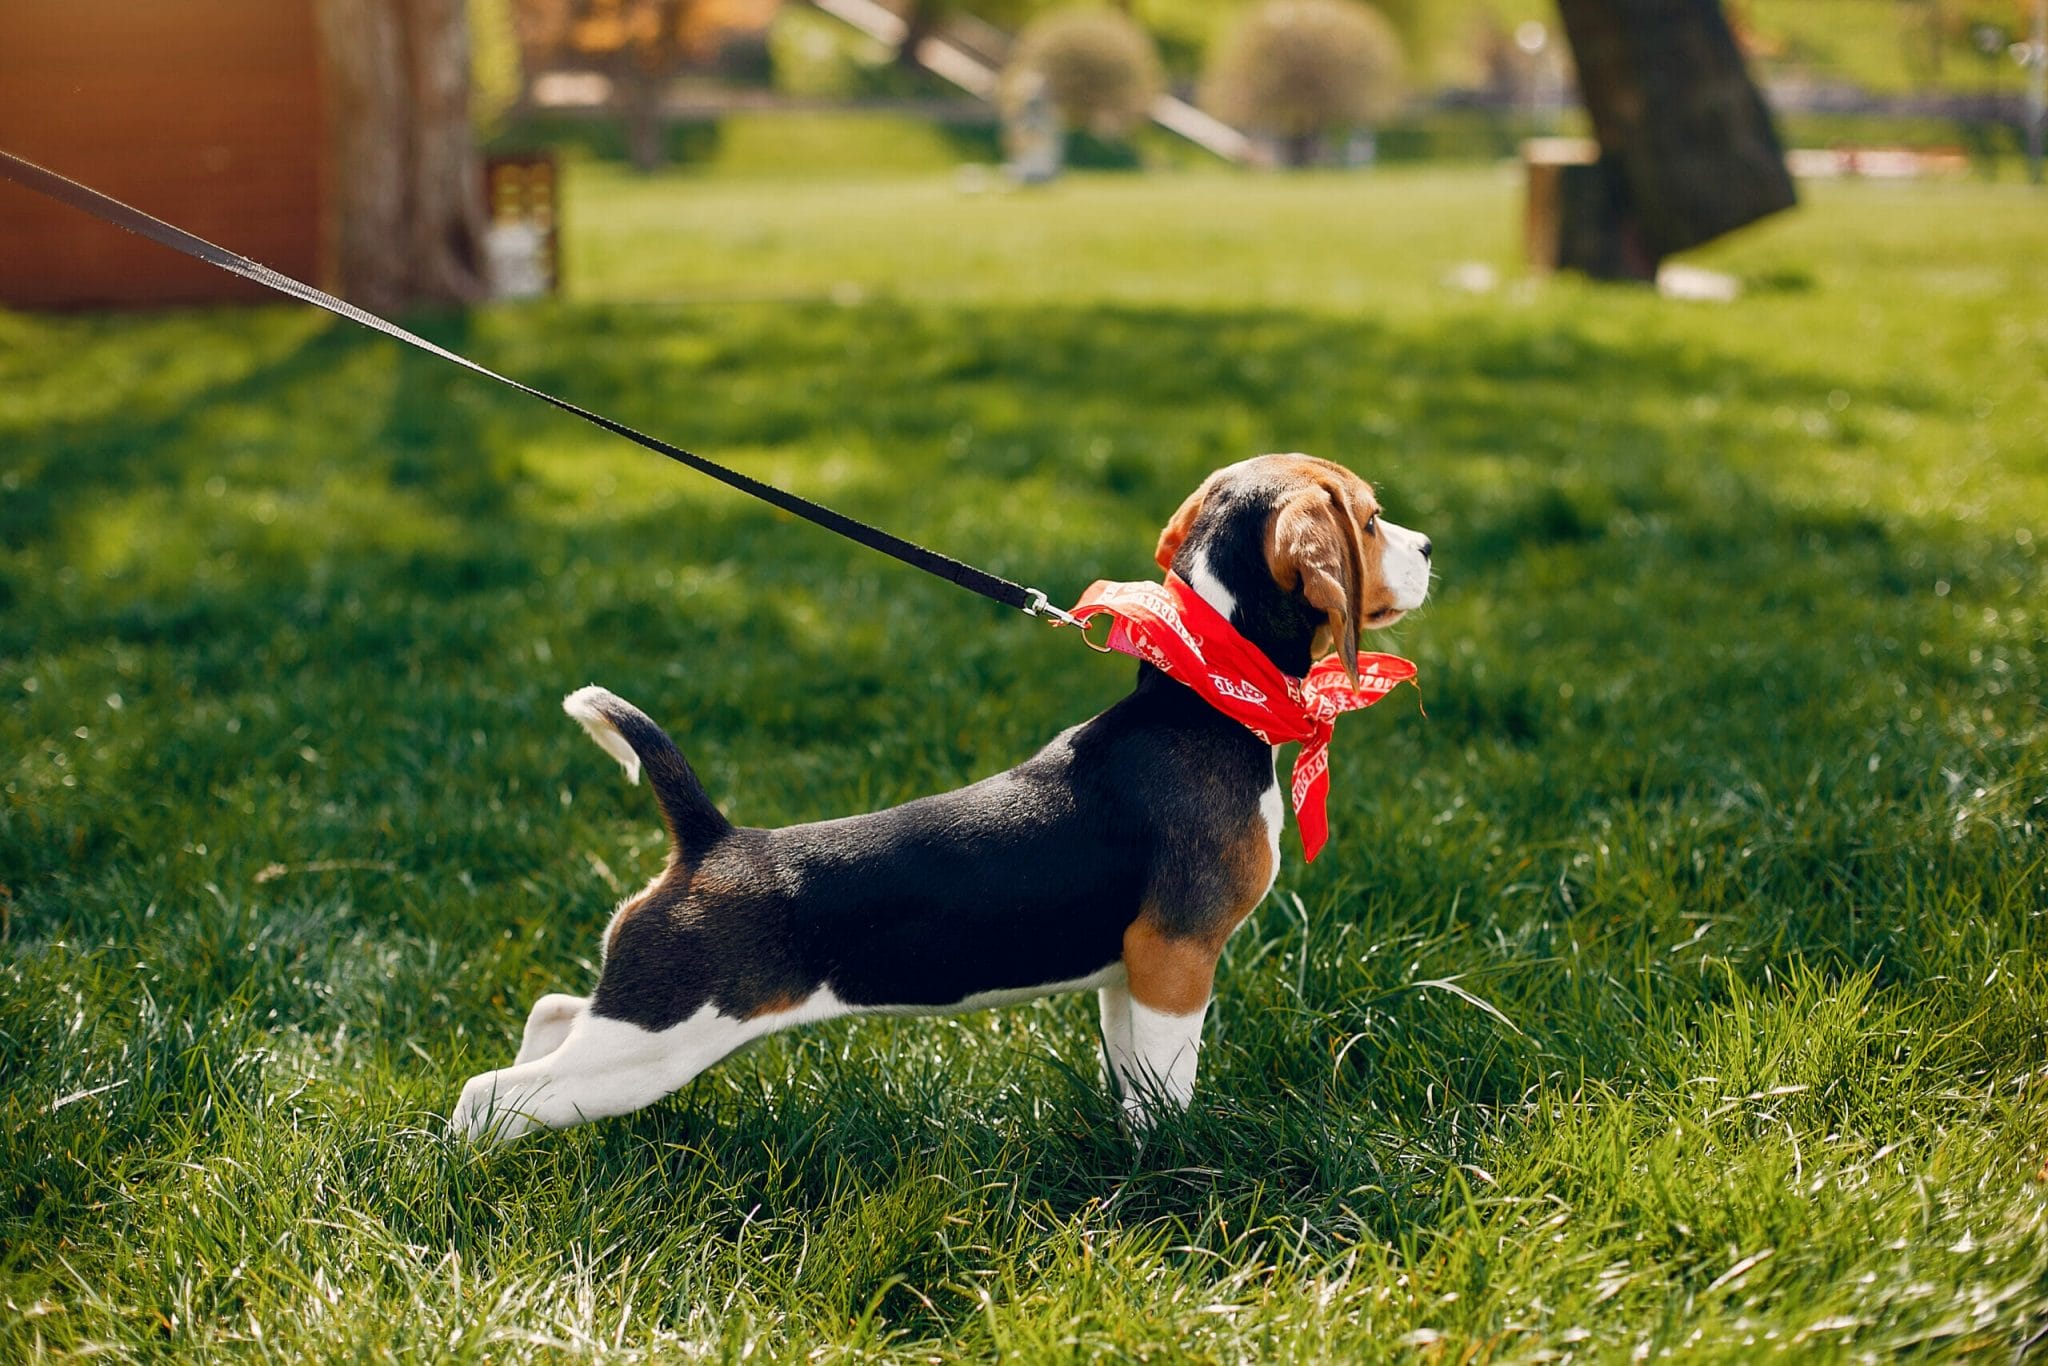 How do you use a check cord for dog training?